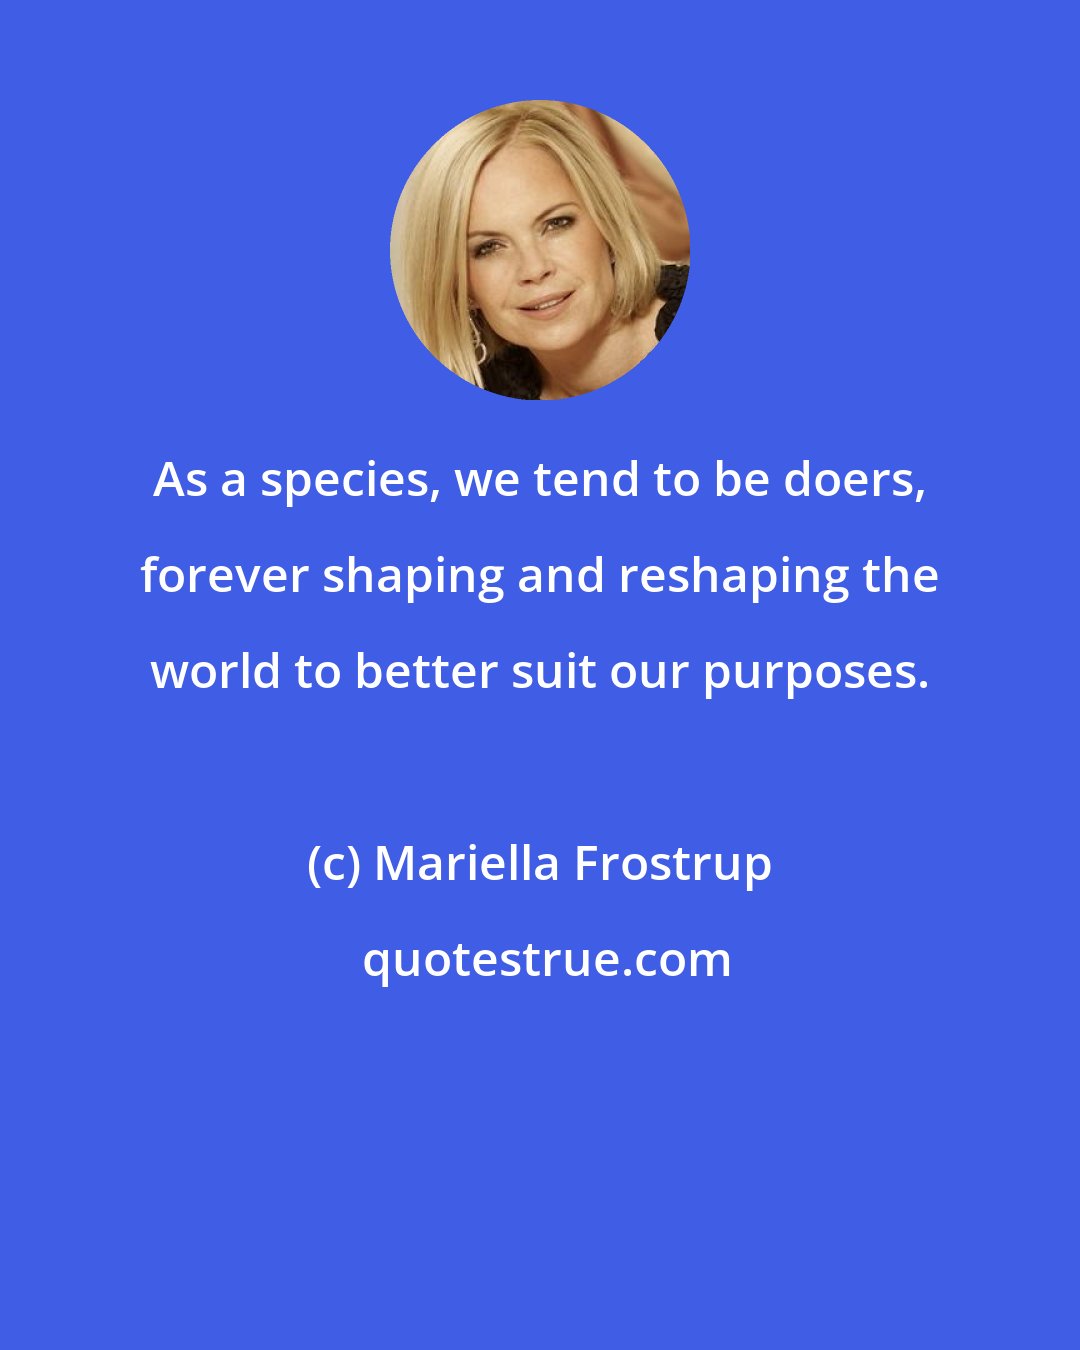 Mariella Frostrup: As a species, we tend to be doers, forever shaping and reshaping the world to better suit our purposes.